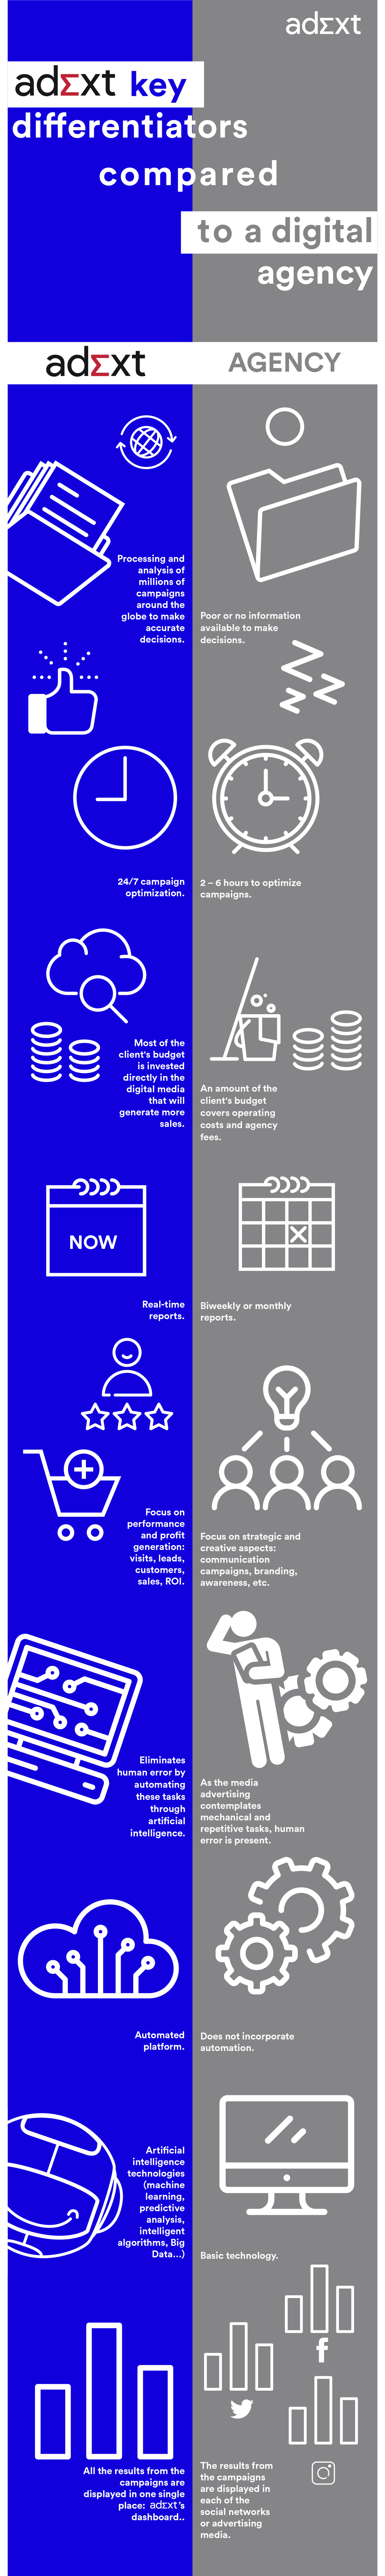 differentiatiors-adext-digital-agency.png